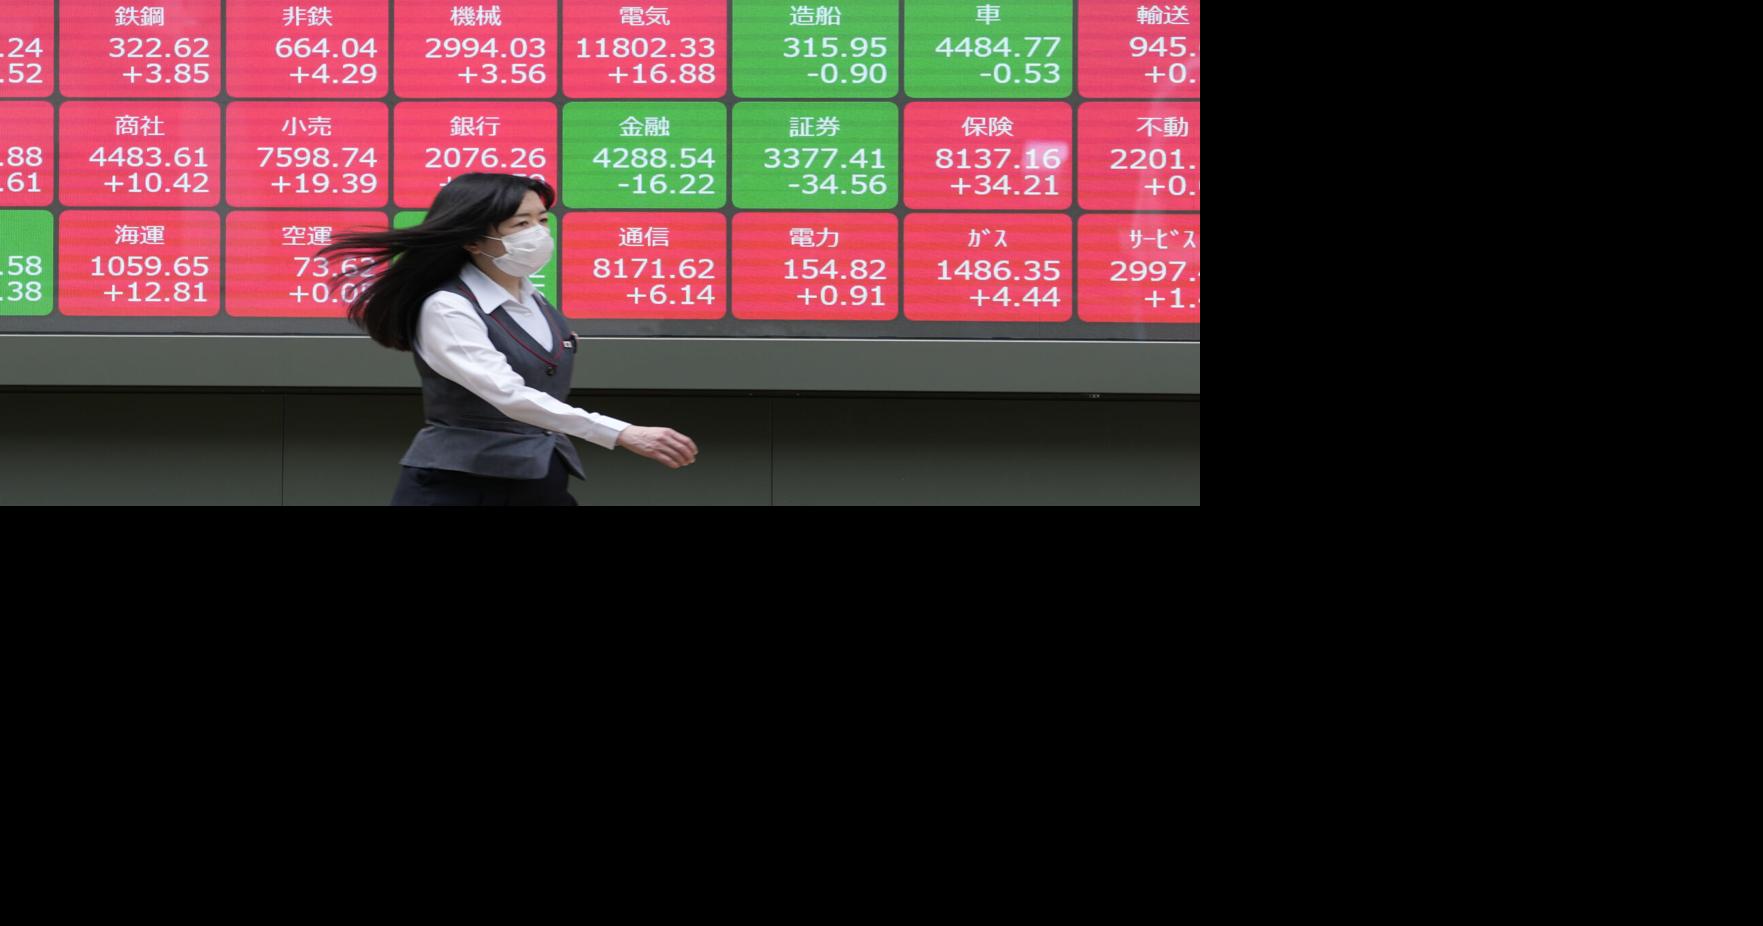 Stock market today: Asian shares are mixed after Wall Street breaks losing streak